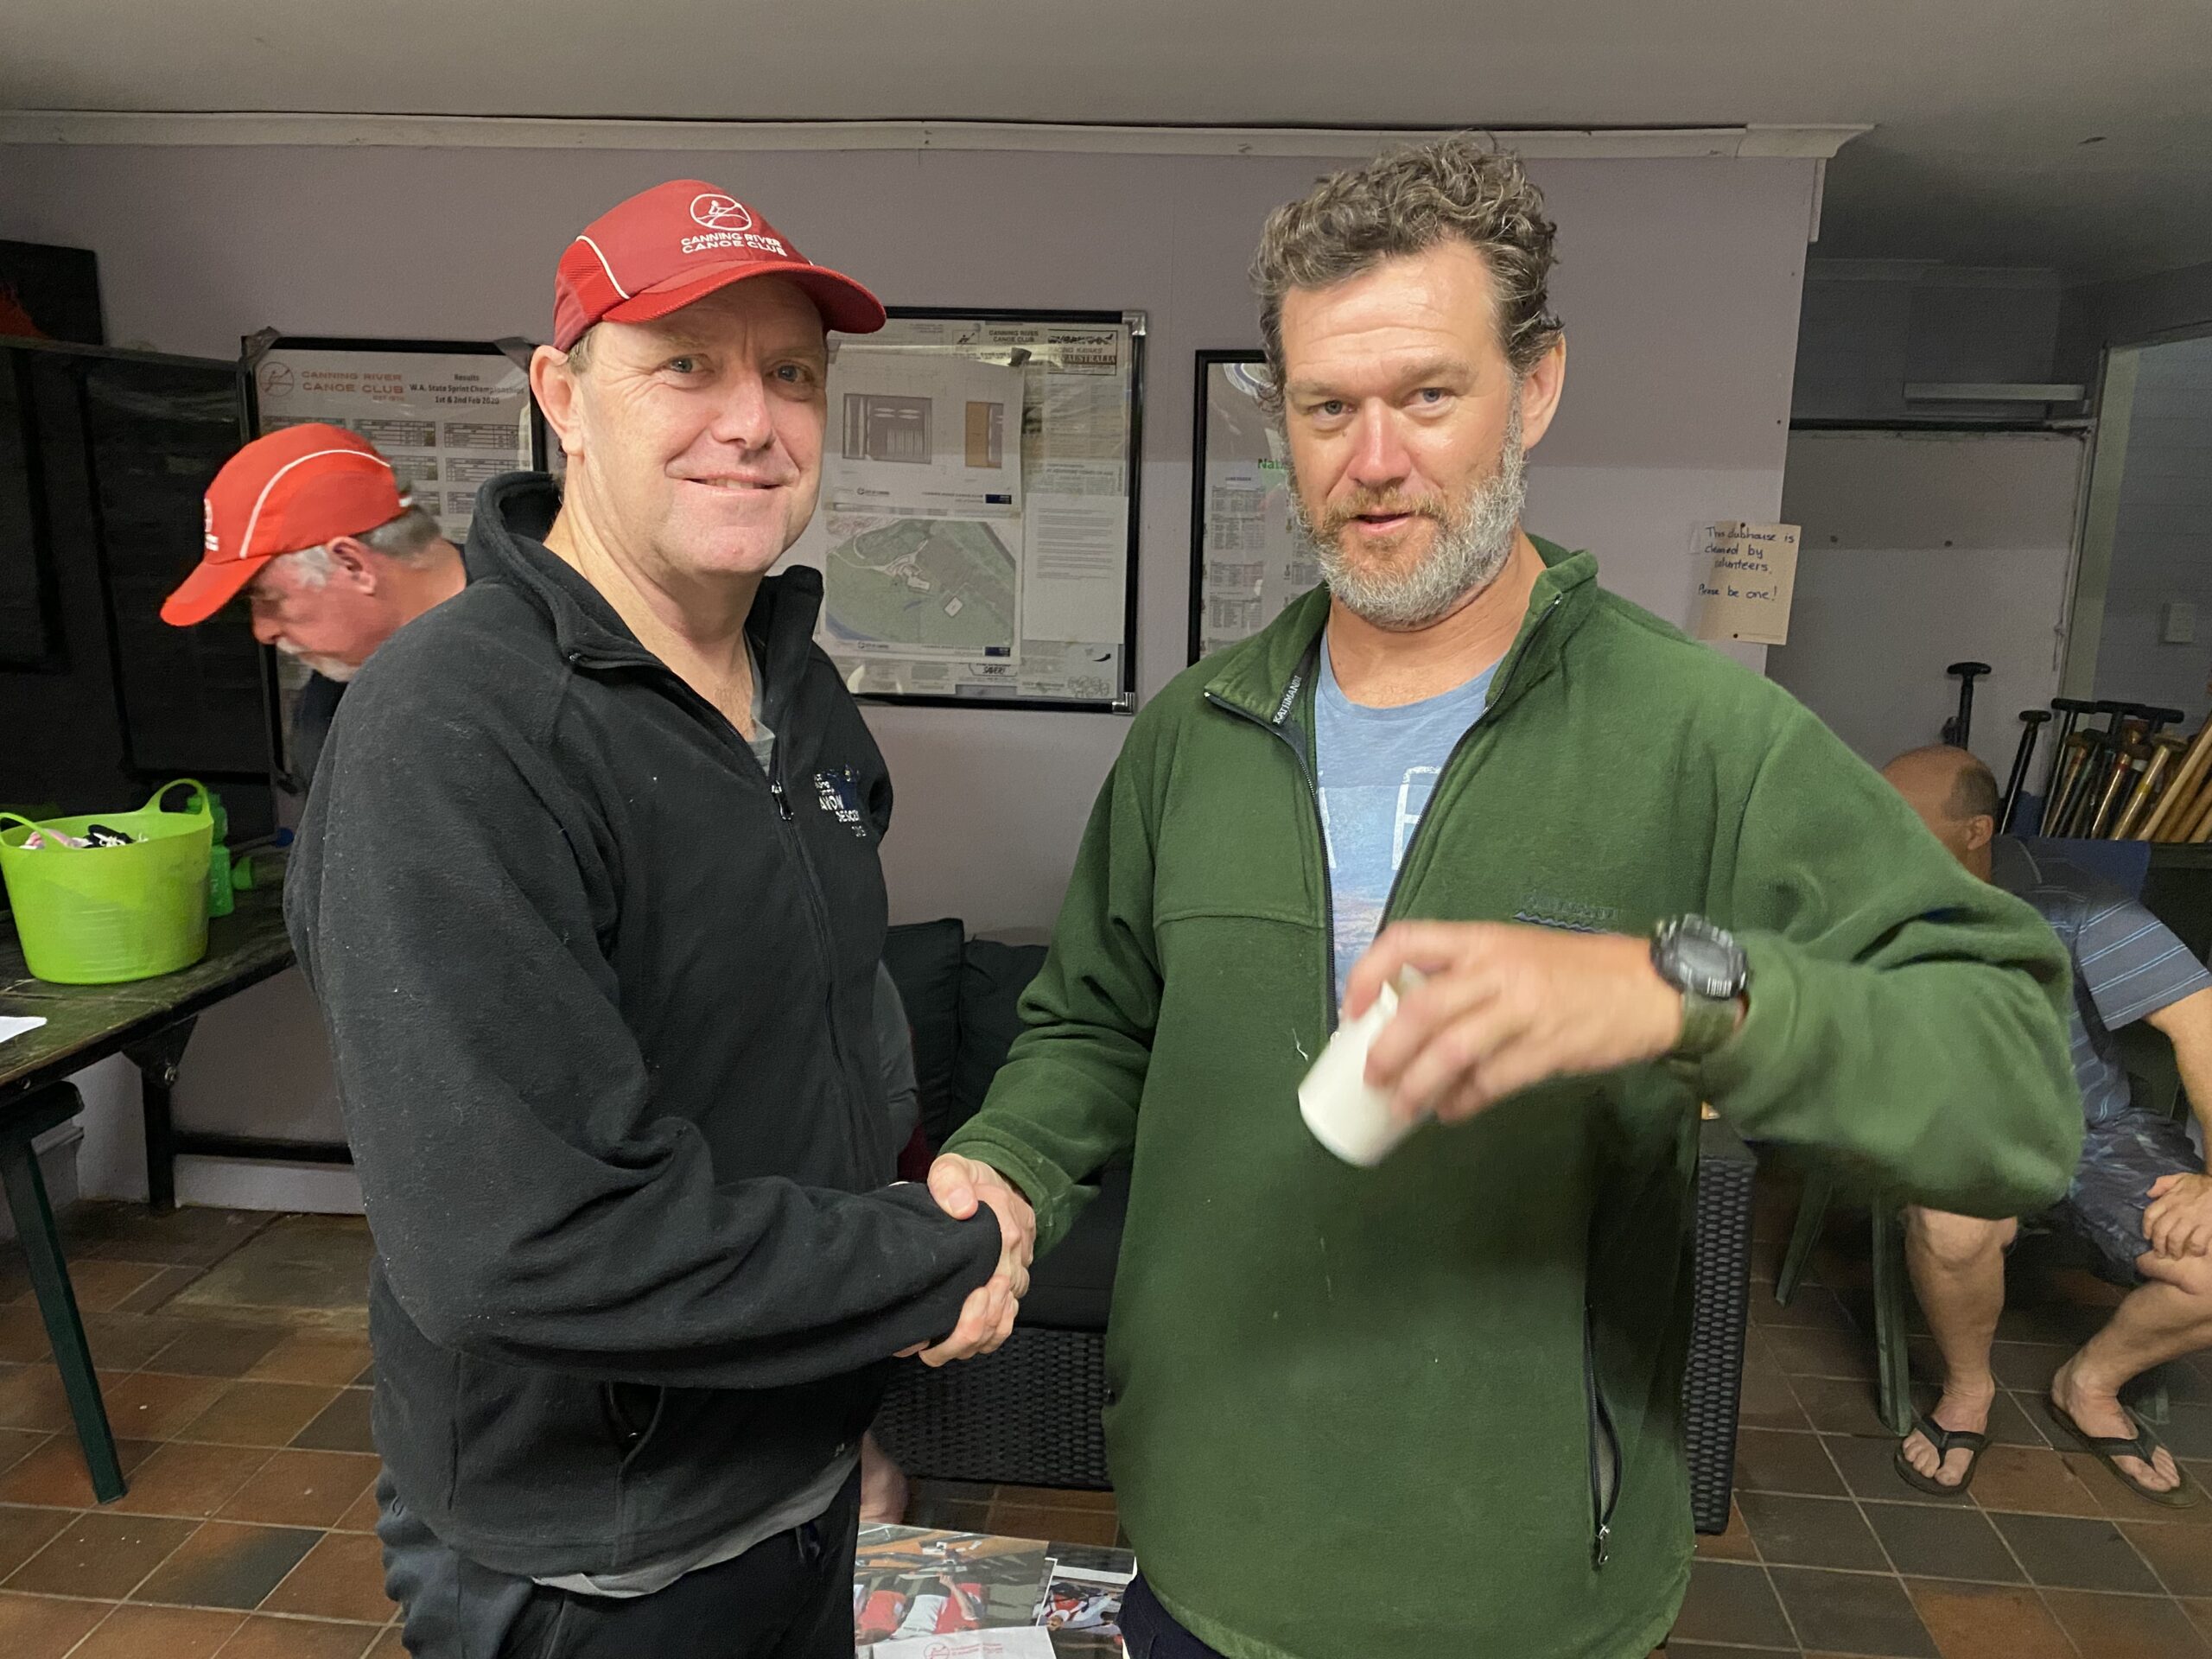 Tuesday 25th October 2022 : Tonight’s photo shows club member Kristian Maliphant presenting tonight’s winner Simon O’Sullivan with a movie voucher.